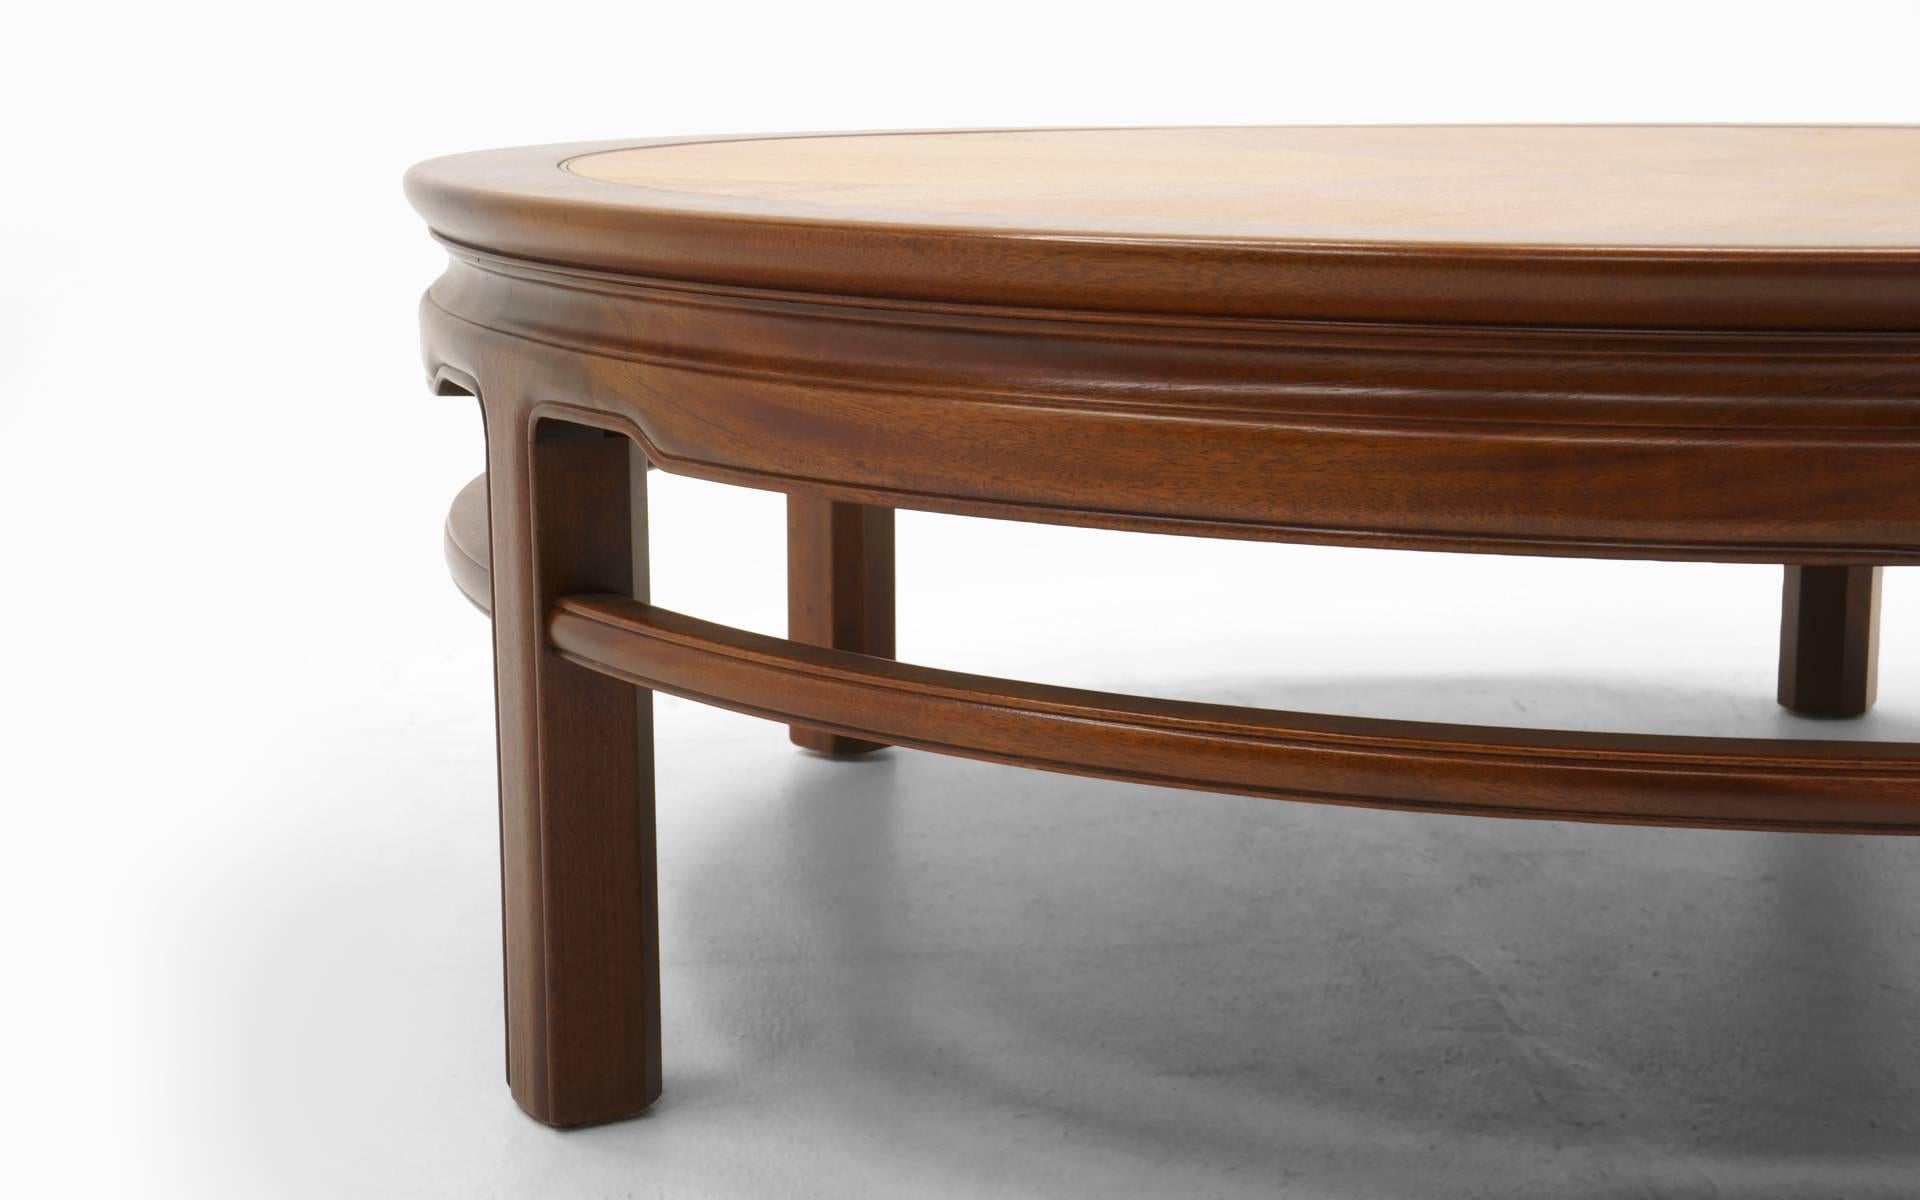 Mid-Century Modern Round Coffee Table by Kittinger, Two-Toned Teak and Mahogany, Expertly Restored